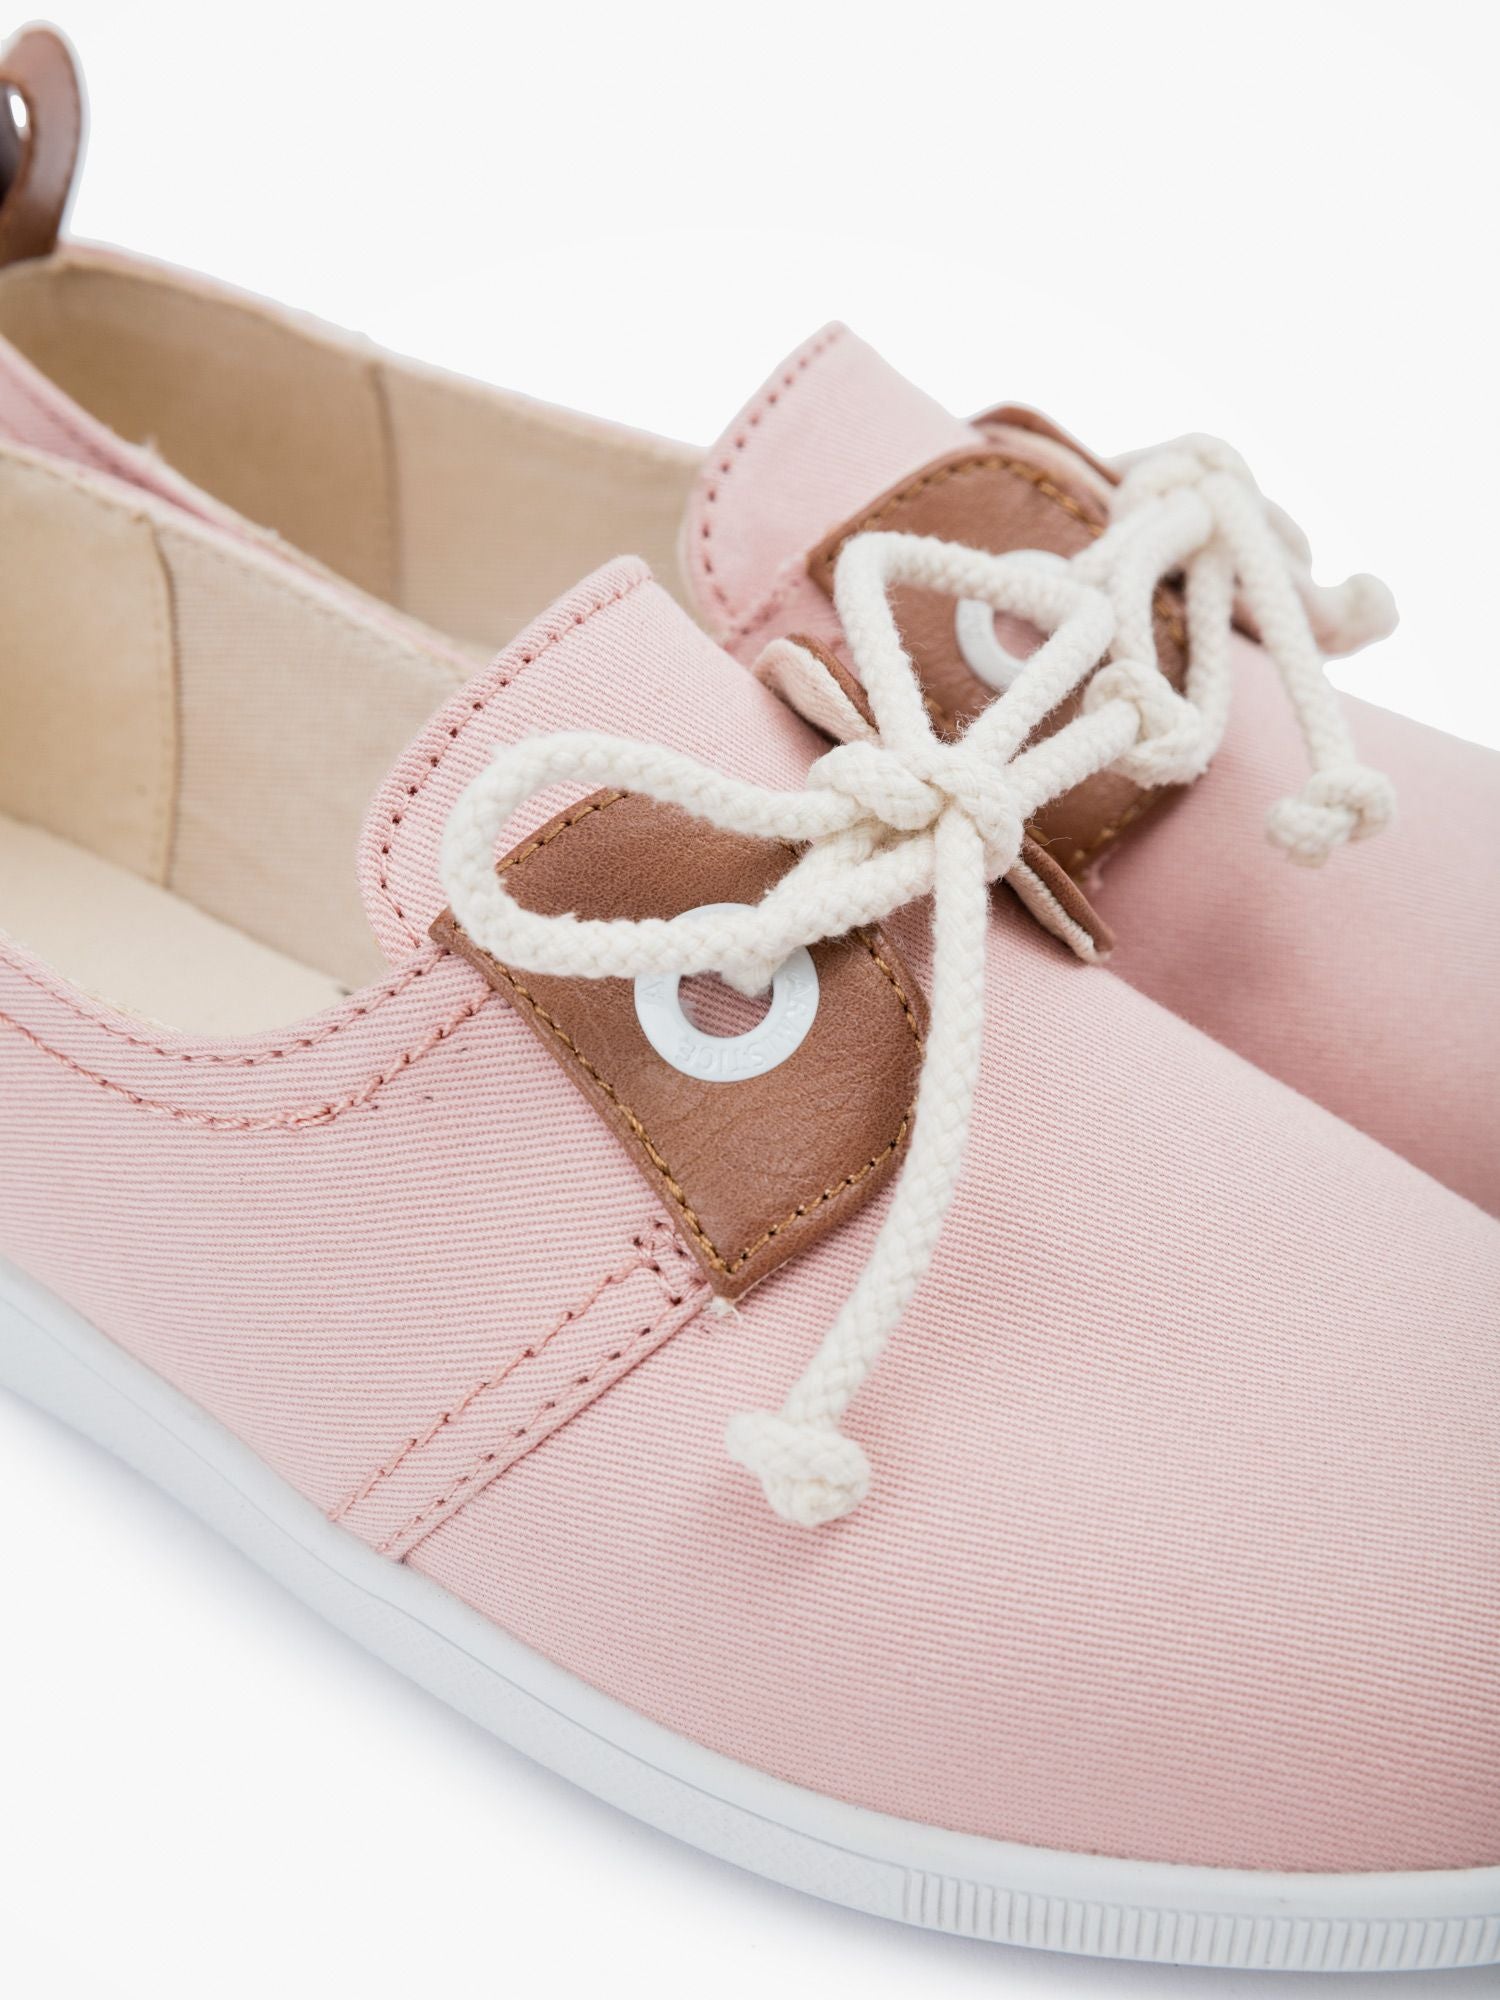 Armistice | Stone One Twill | Women's Sneakers | Rose/Pink 37, 38, 39, 40, 41